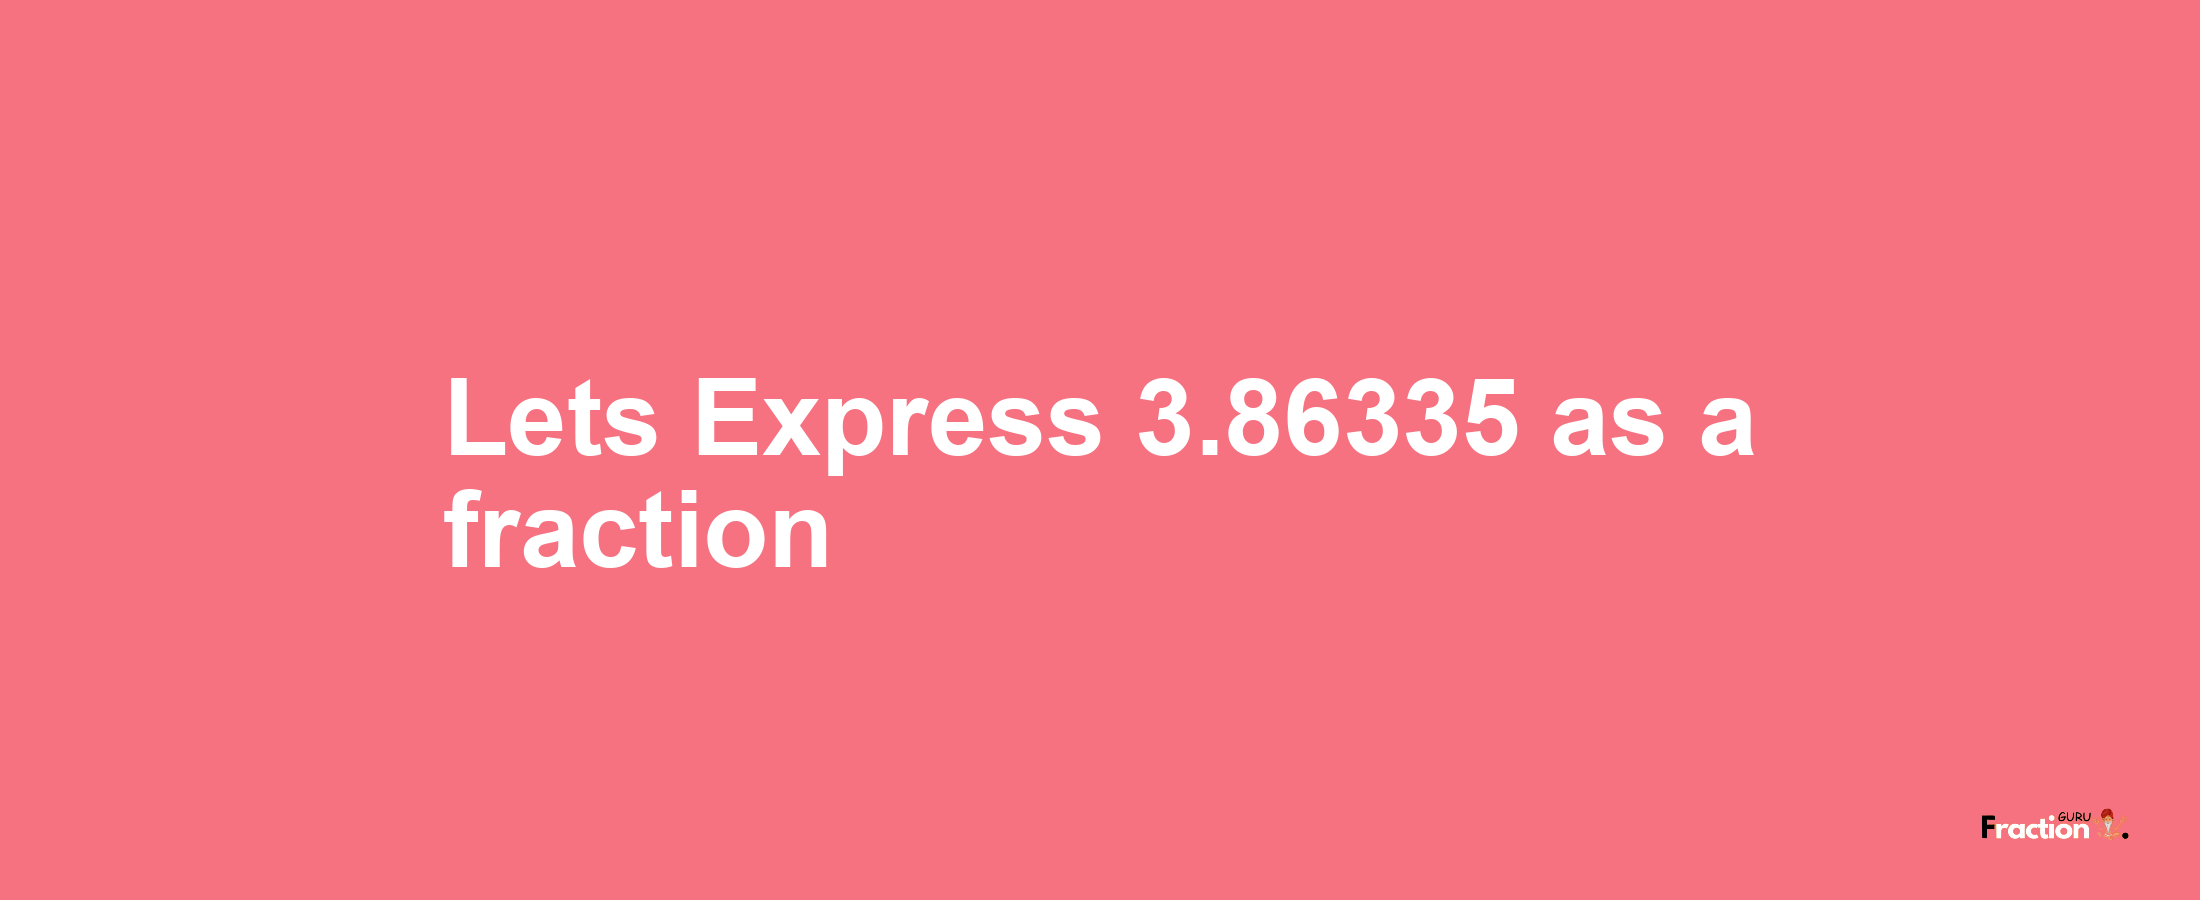 Lets Express 3.86335 as afraction